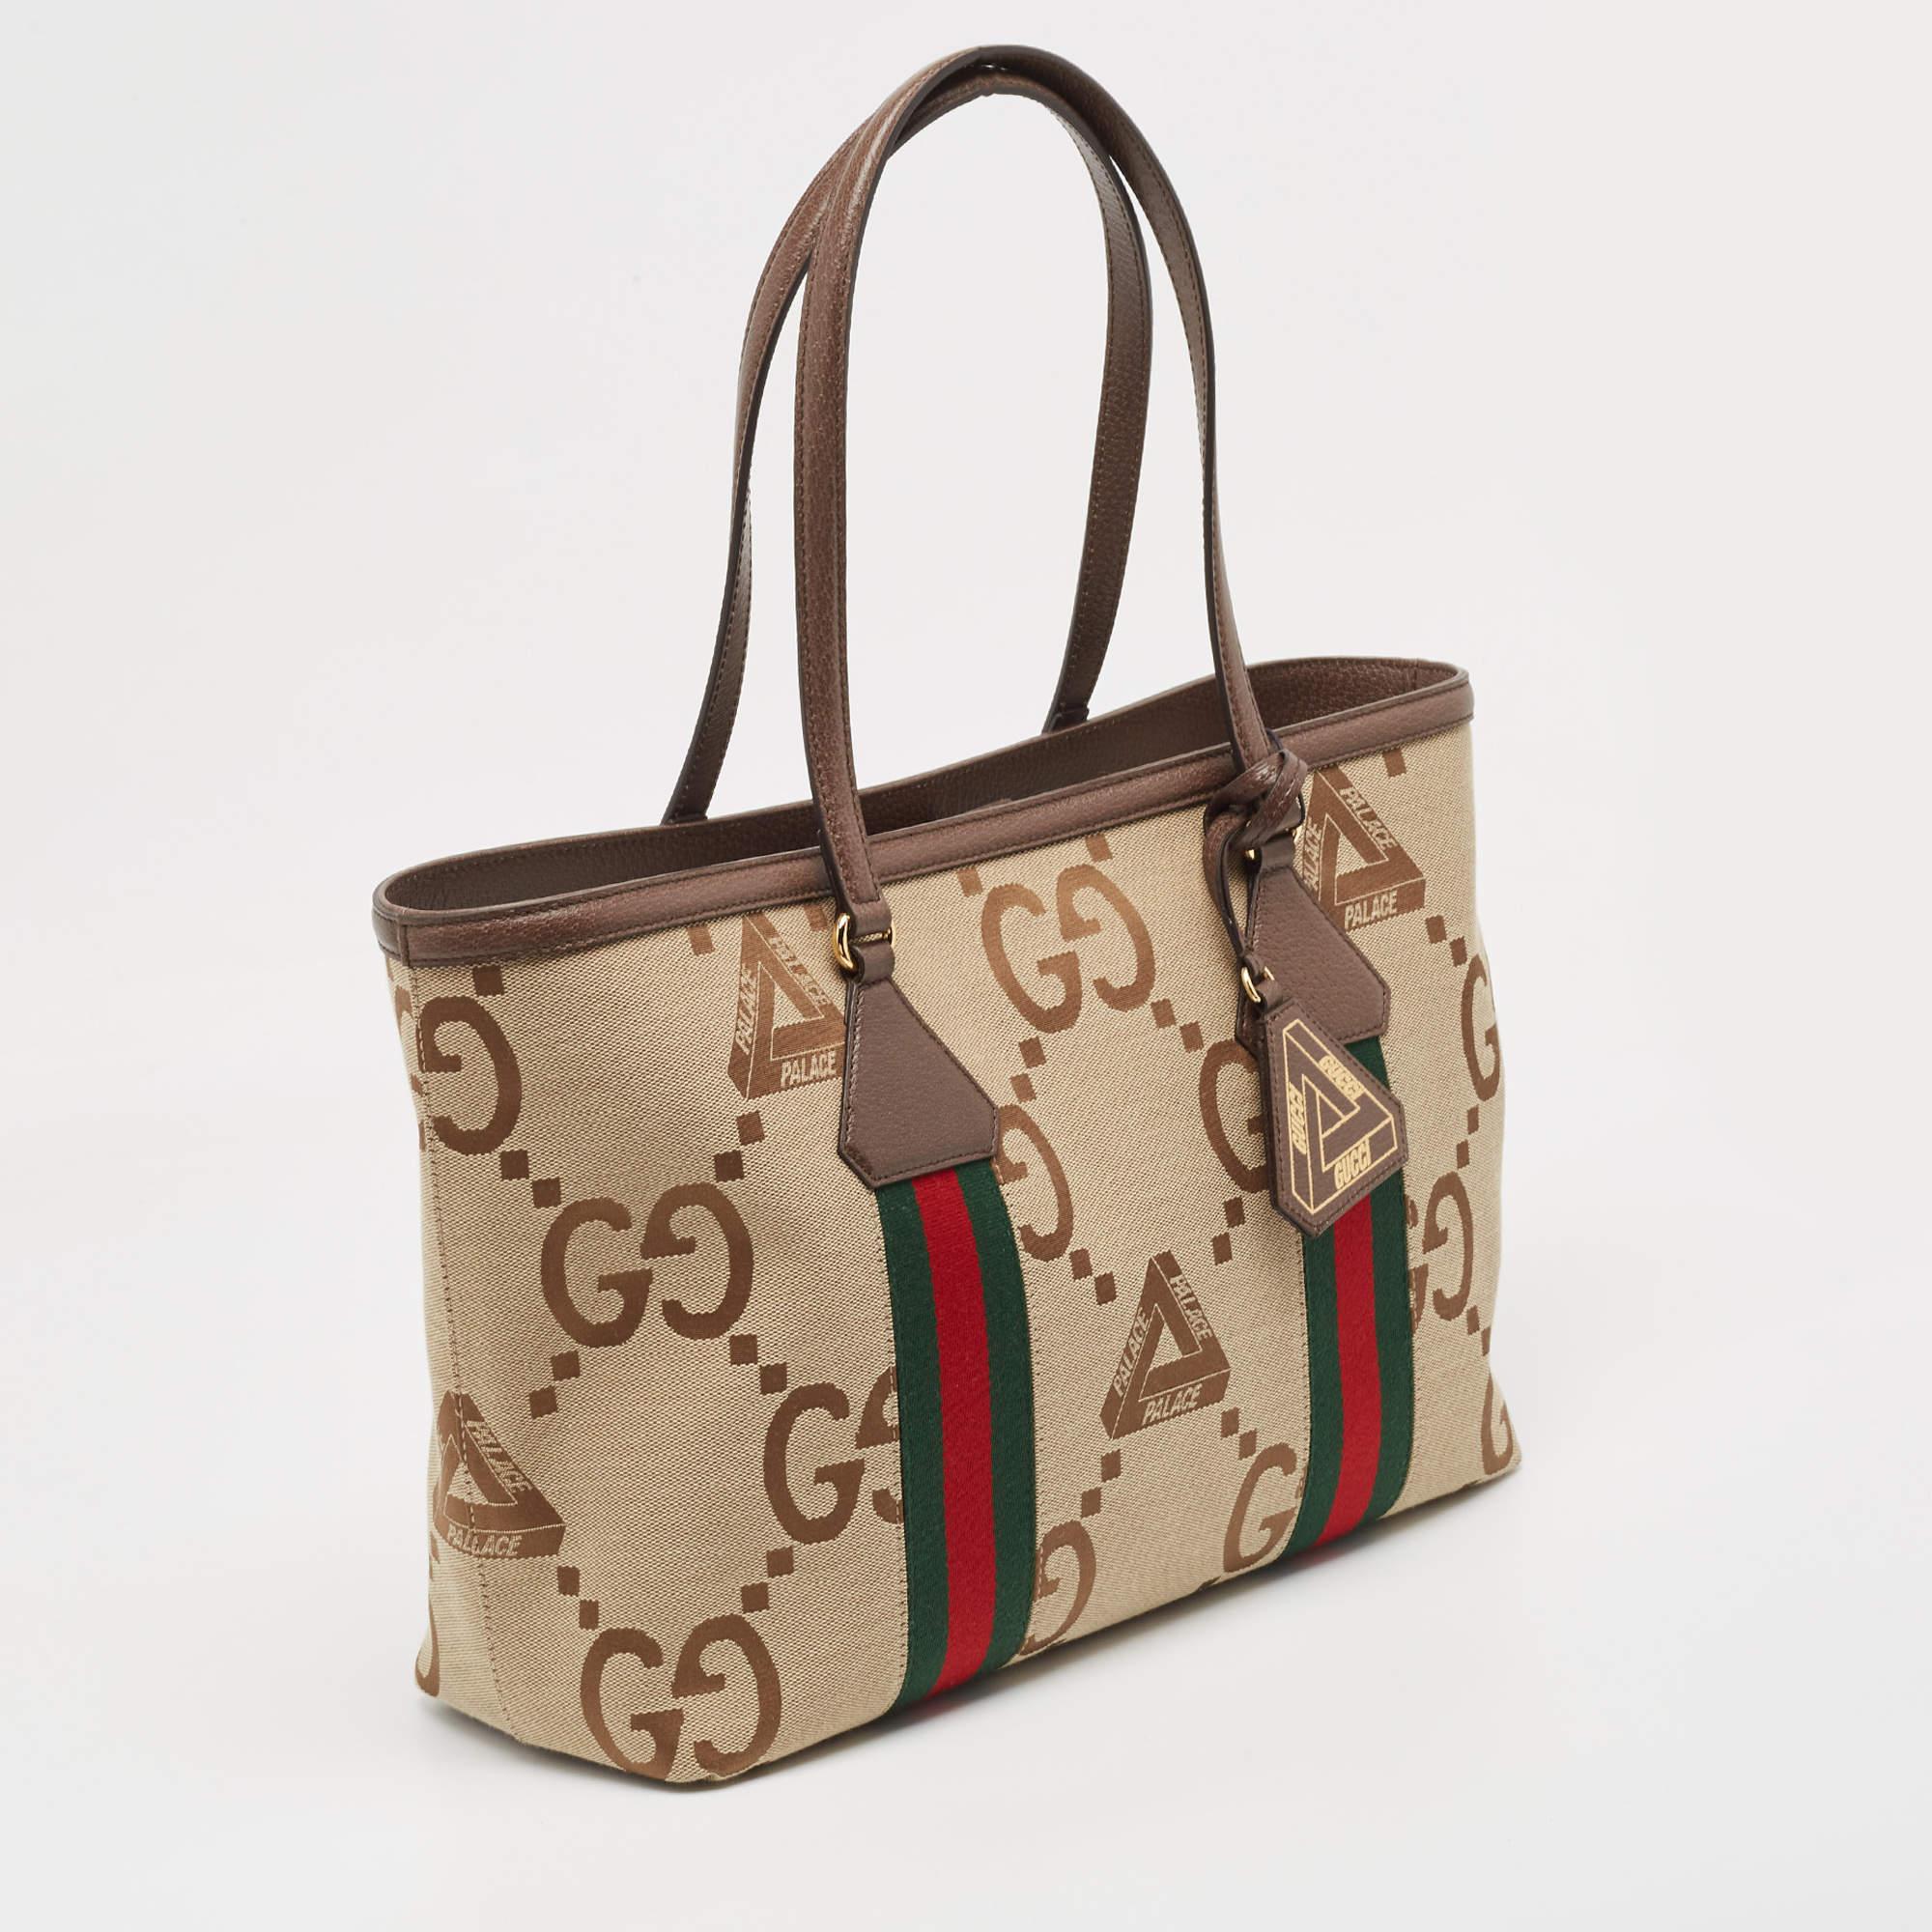 Know to create stylish, sophisticated, and timeless designs, this is a brand worth investing in. The bags that come from this label's atelier are exquisite. This Gucci x Palace tote bag is no different. It has been made from quality materials and